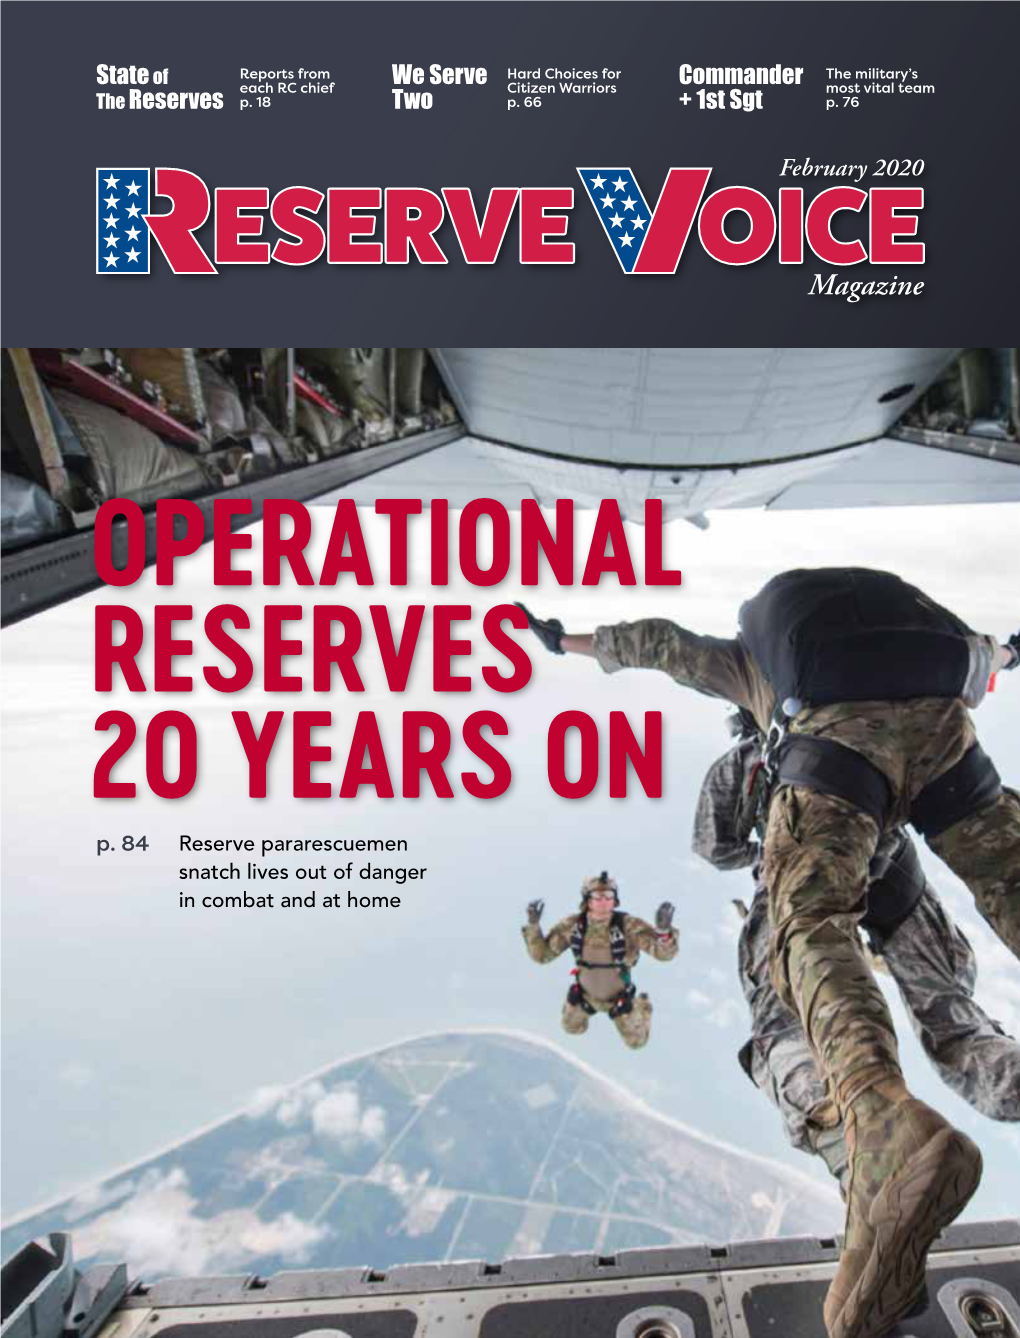 OPERATIONAL RESERVES 20 YEARS on P